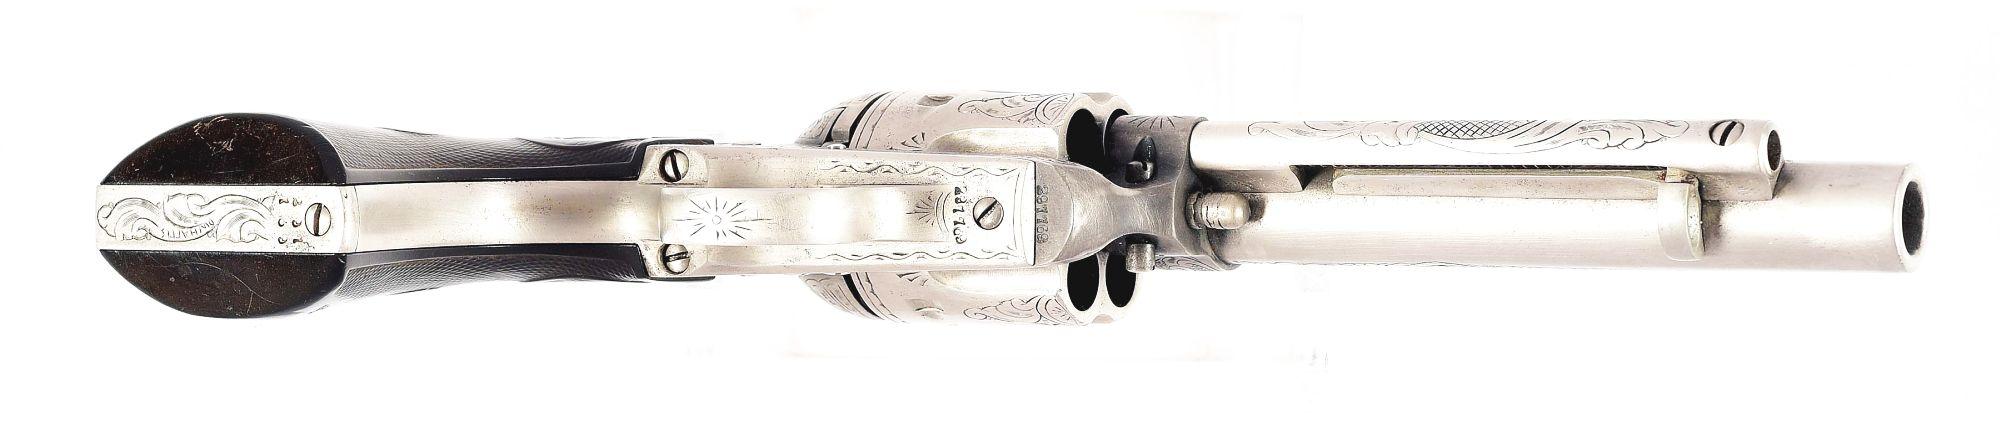 (C) NICKEL PLATED COLT SINGLE ACTION ARMY REVOLVER ENGRAVED BY D.W. HARRIS.